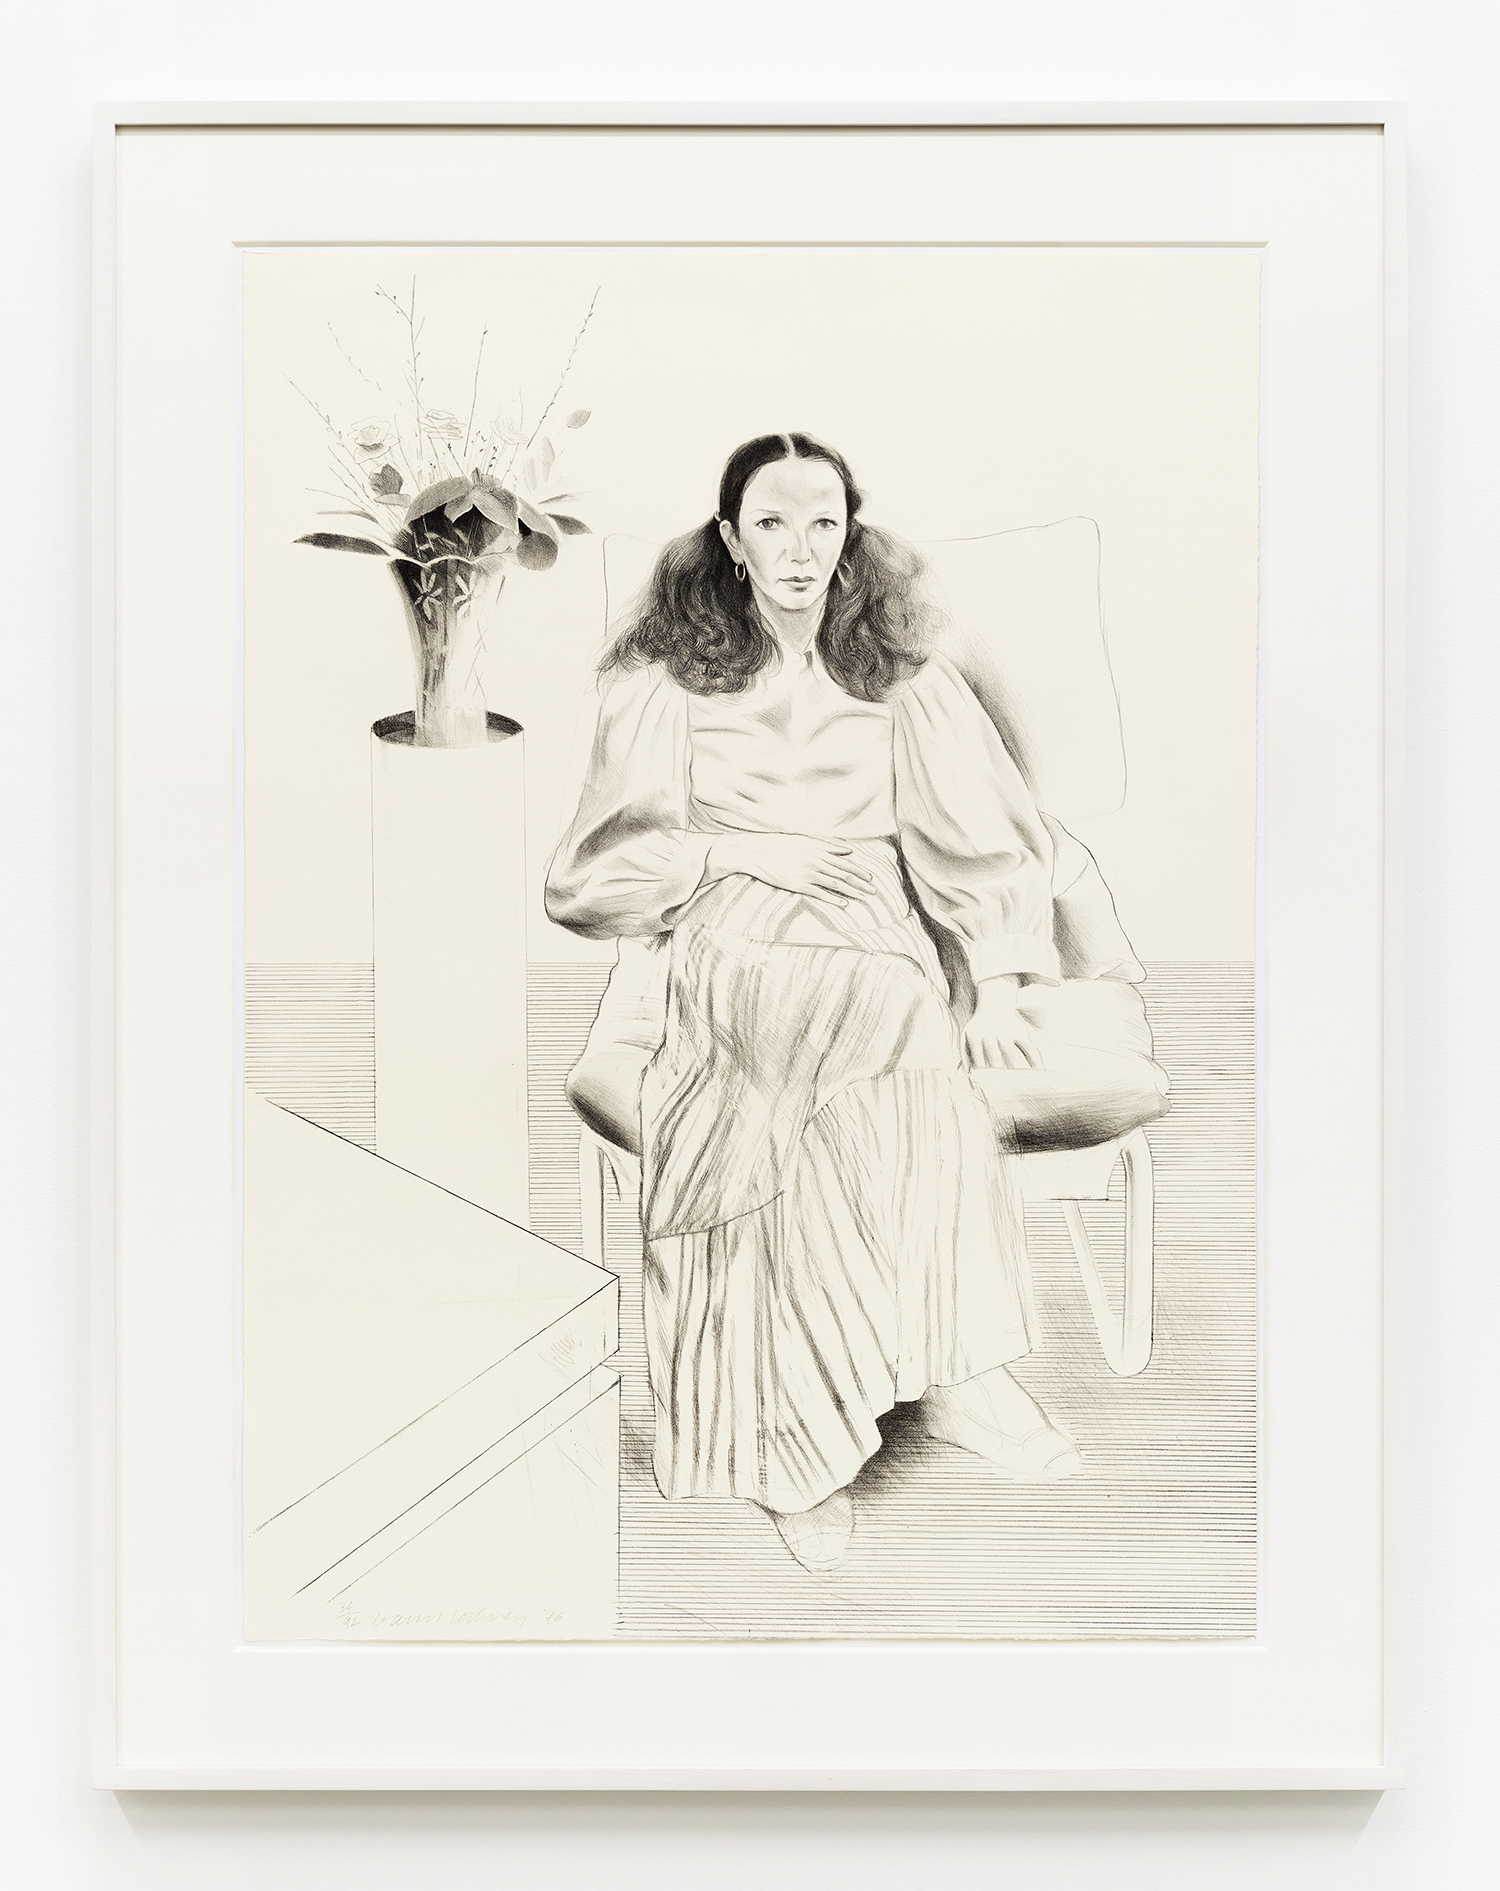 David Hockney Brooke Hopper, 1976 Lithograph 37 x 28 inches (94 x 71.1 cm) Edition of 92